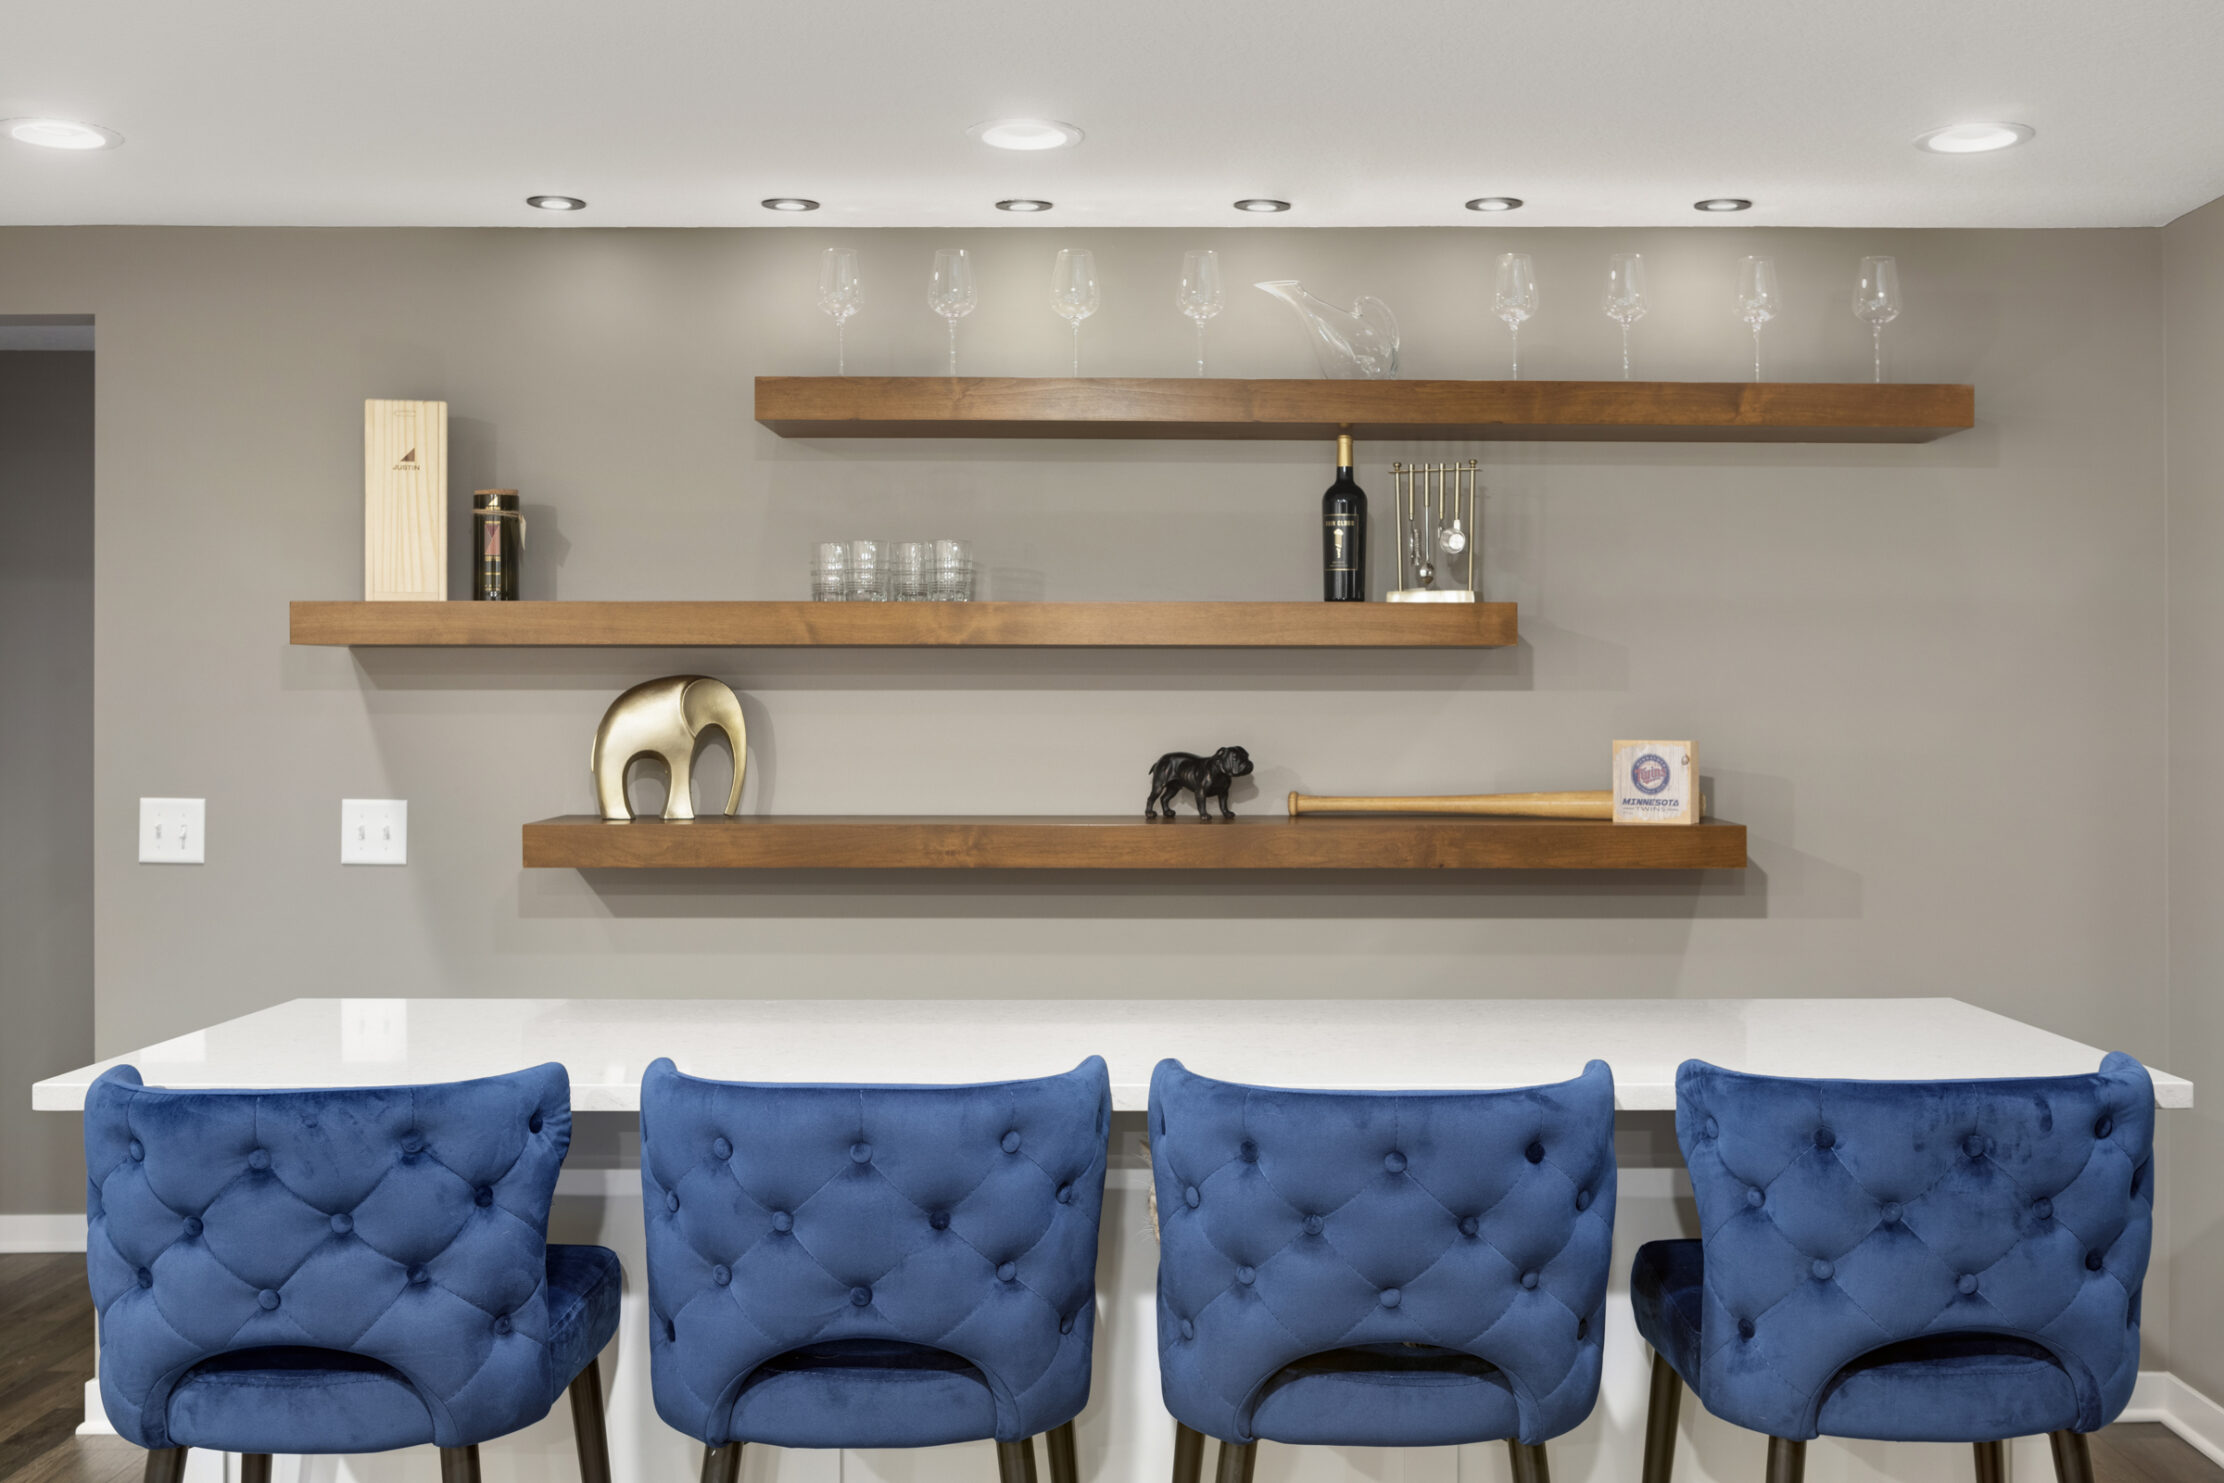 Basement remodel in Minneapolis, Minnesota with blue chairs and floating shelves against a gray wall.